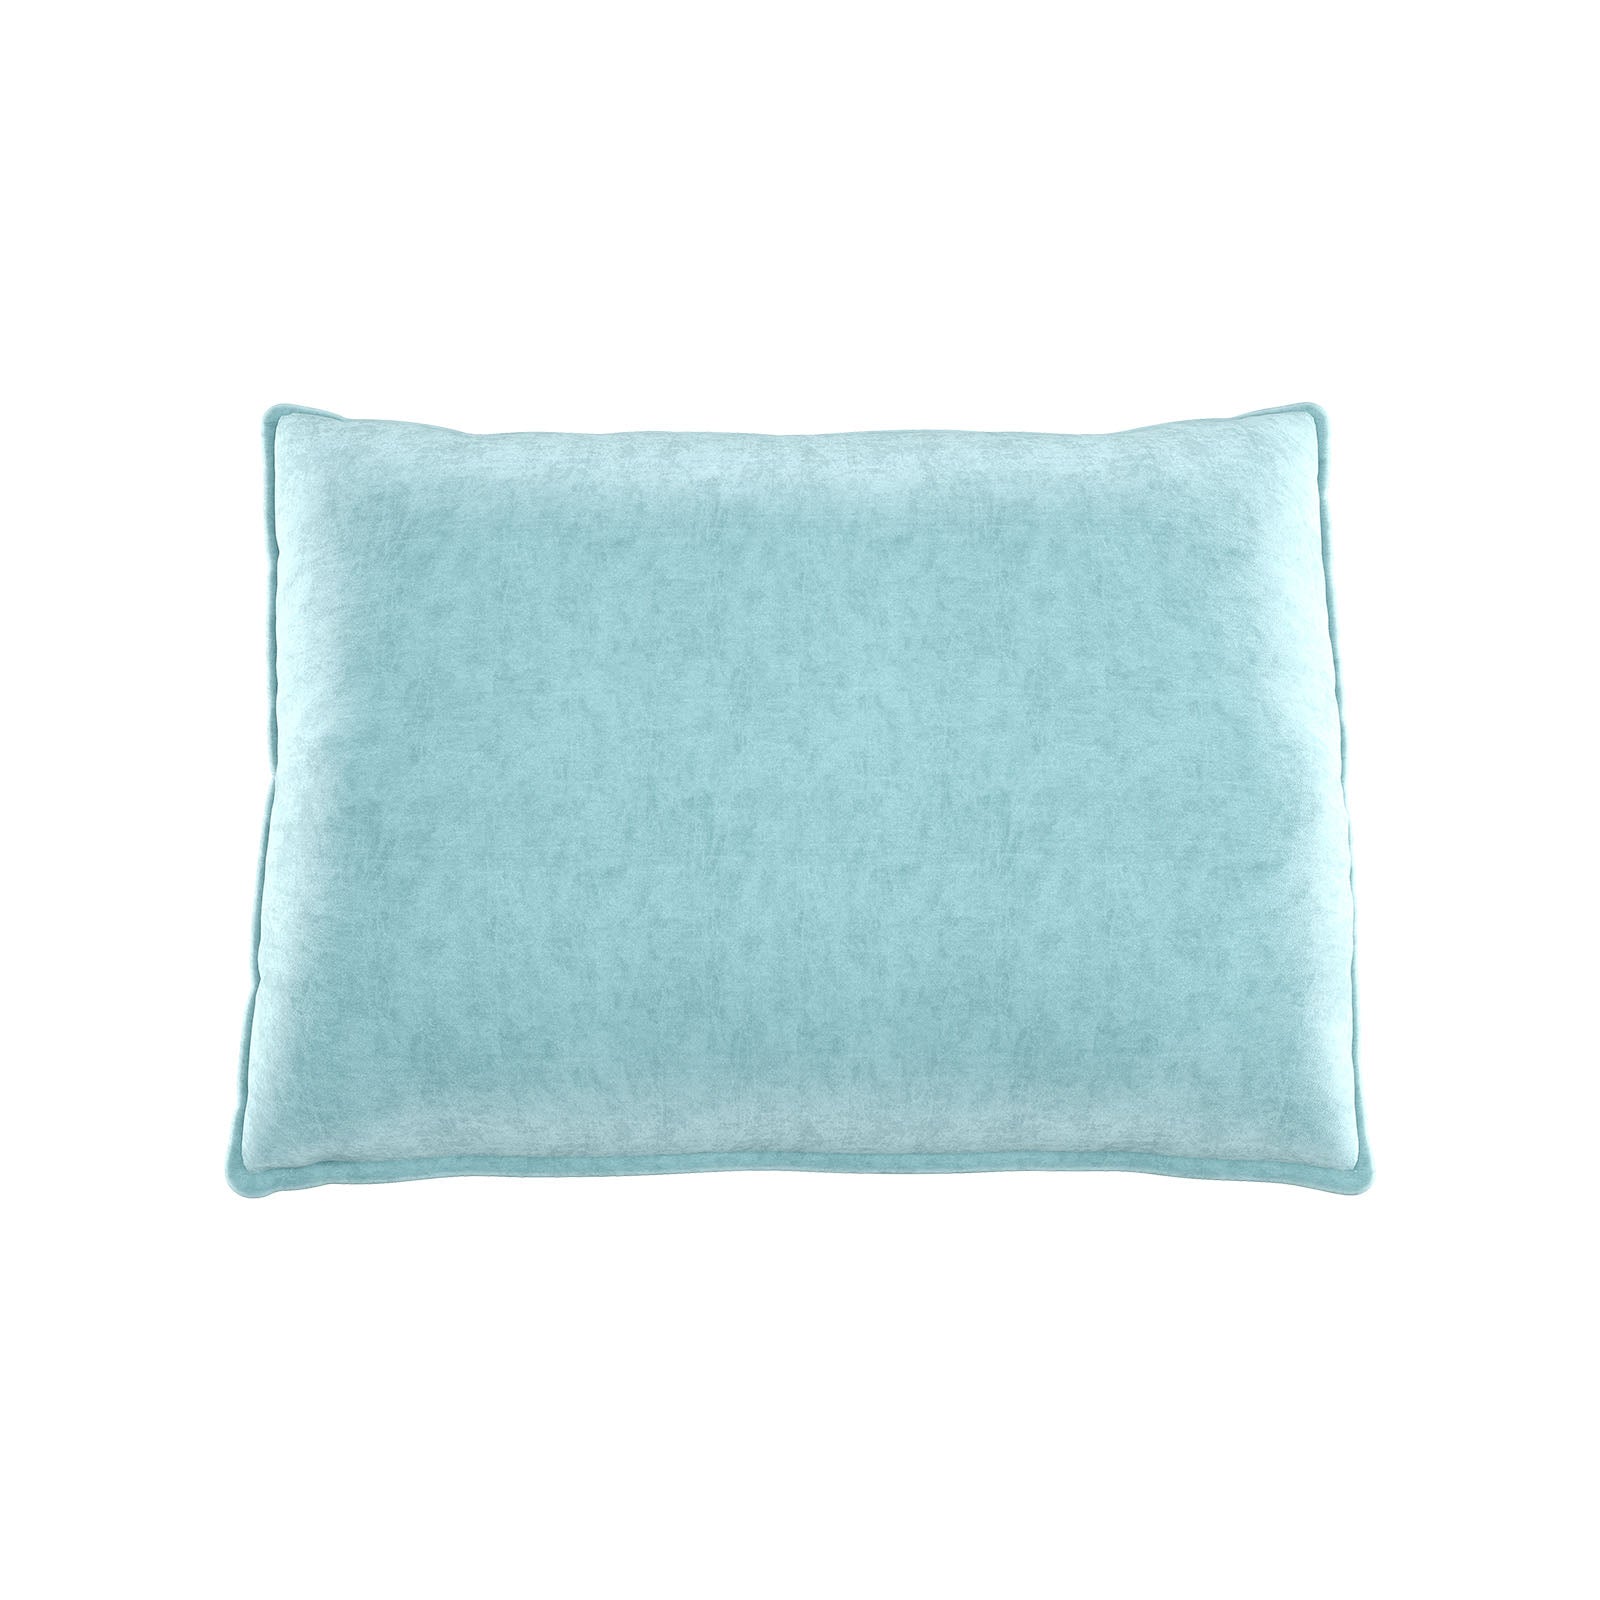 HONBAY Fabric Aqua Blue Pillow with Removable Cover